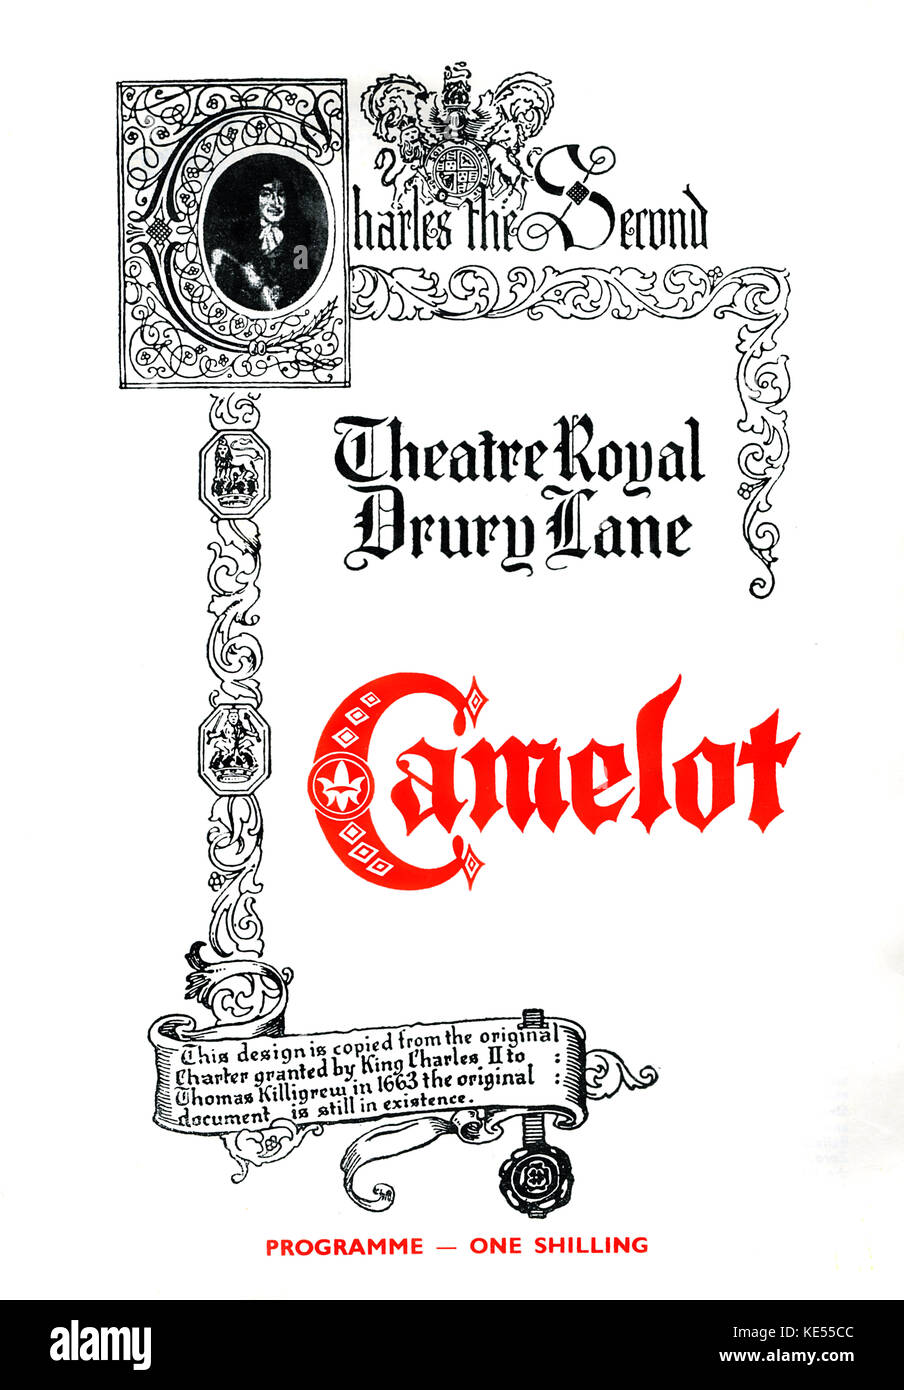 Camelot- musical at Theatre Royal Drury Lane, London. Cardew Robinson as Pellinore, Directed and Choreographed by Robert Helpmann, Music by Frederick Loewe. Programme cover, 1964. Stock Photo